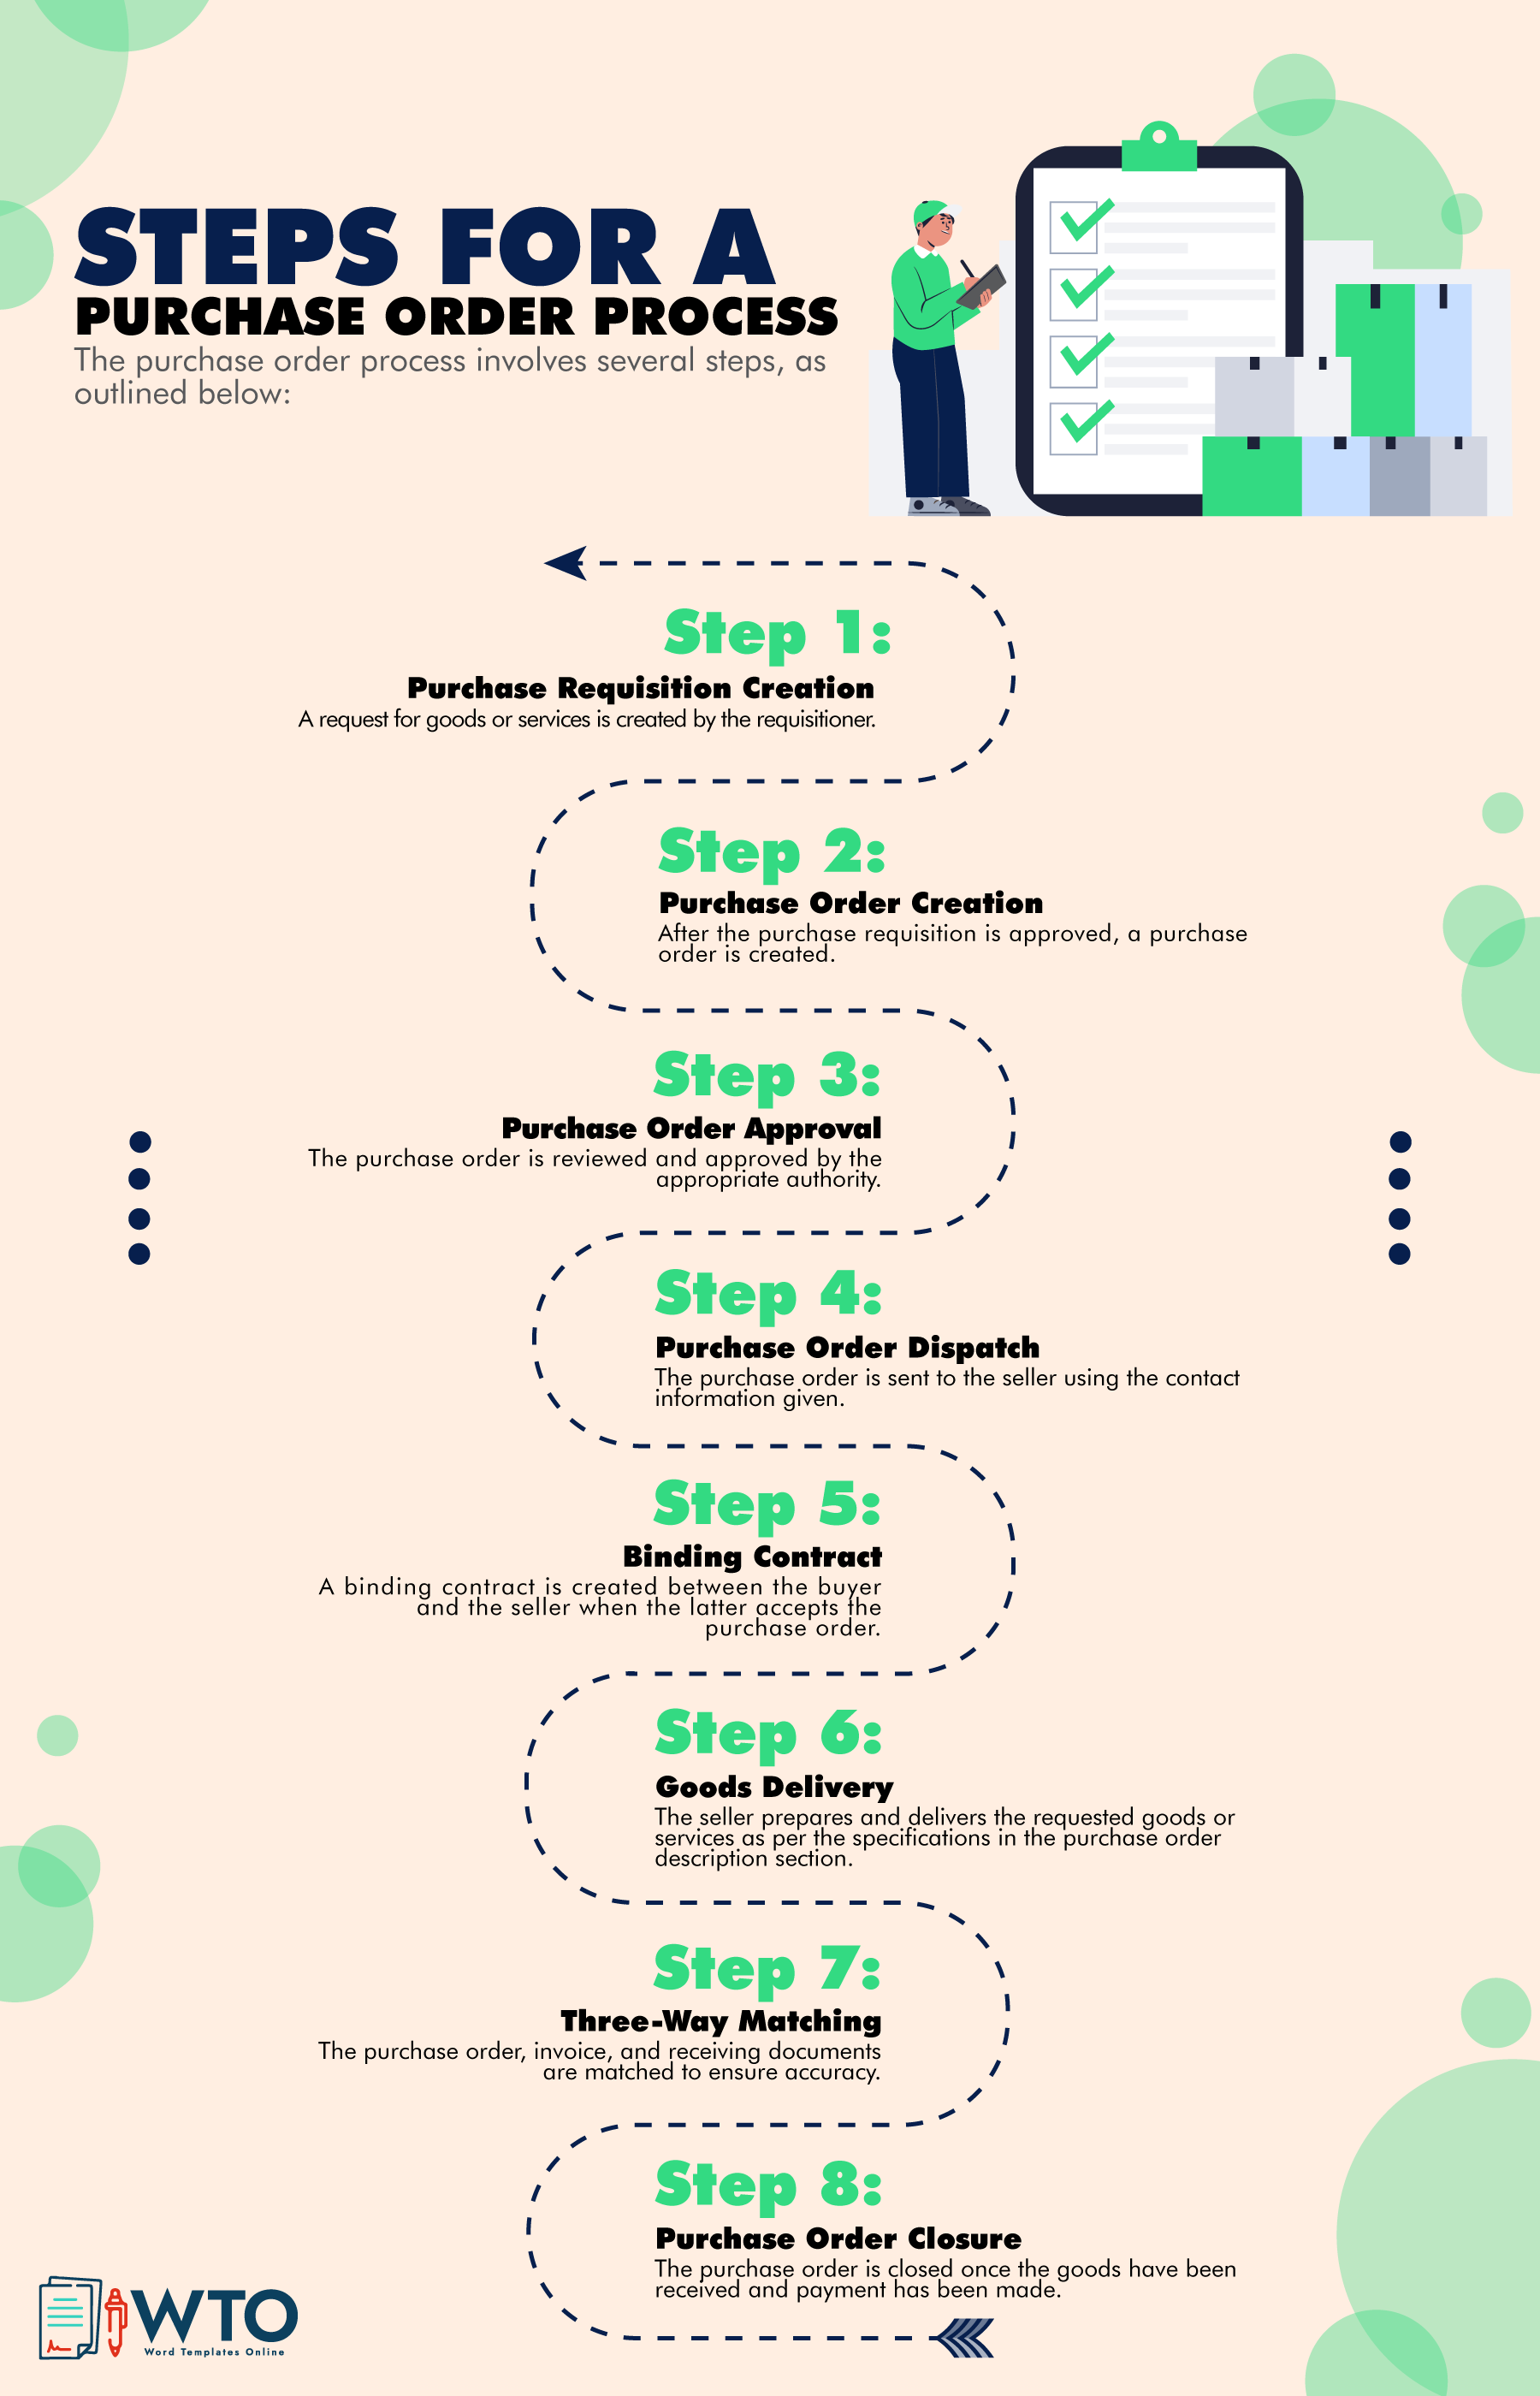 This infographic is about the steps for a purchase order process.